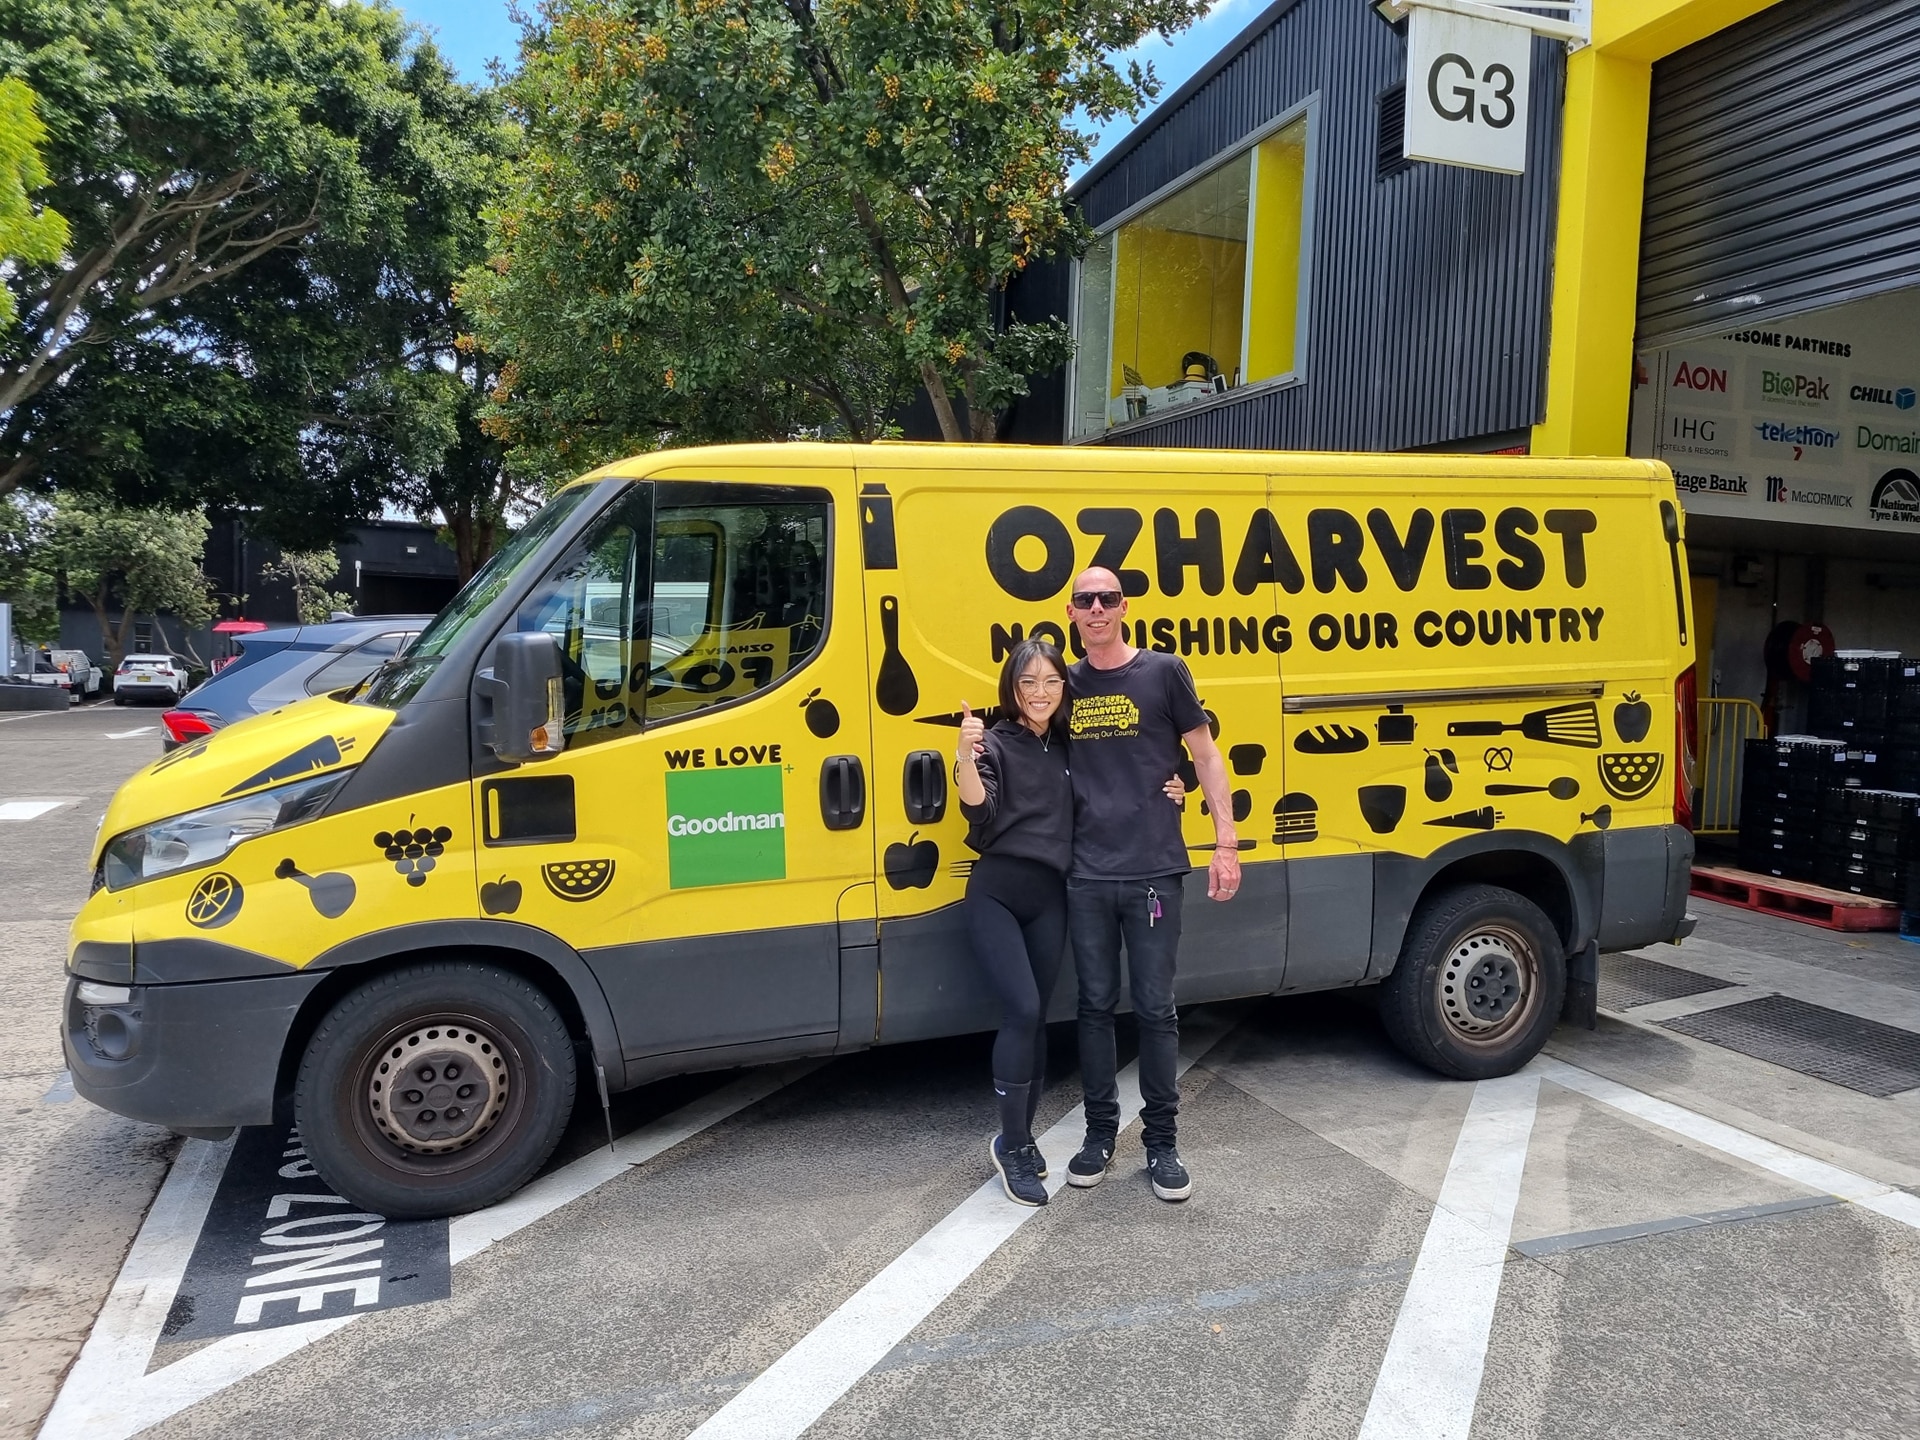 A day in the life of an OzHarvest driver